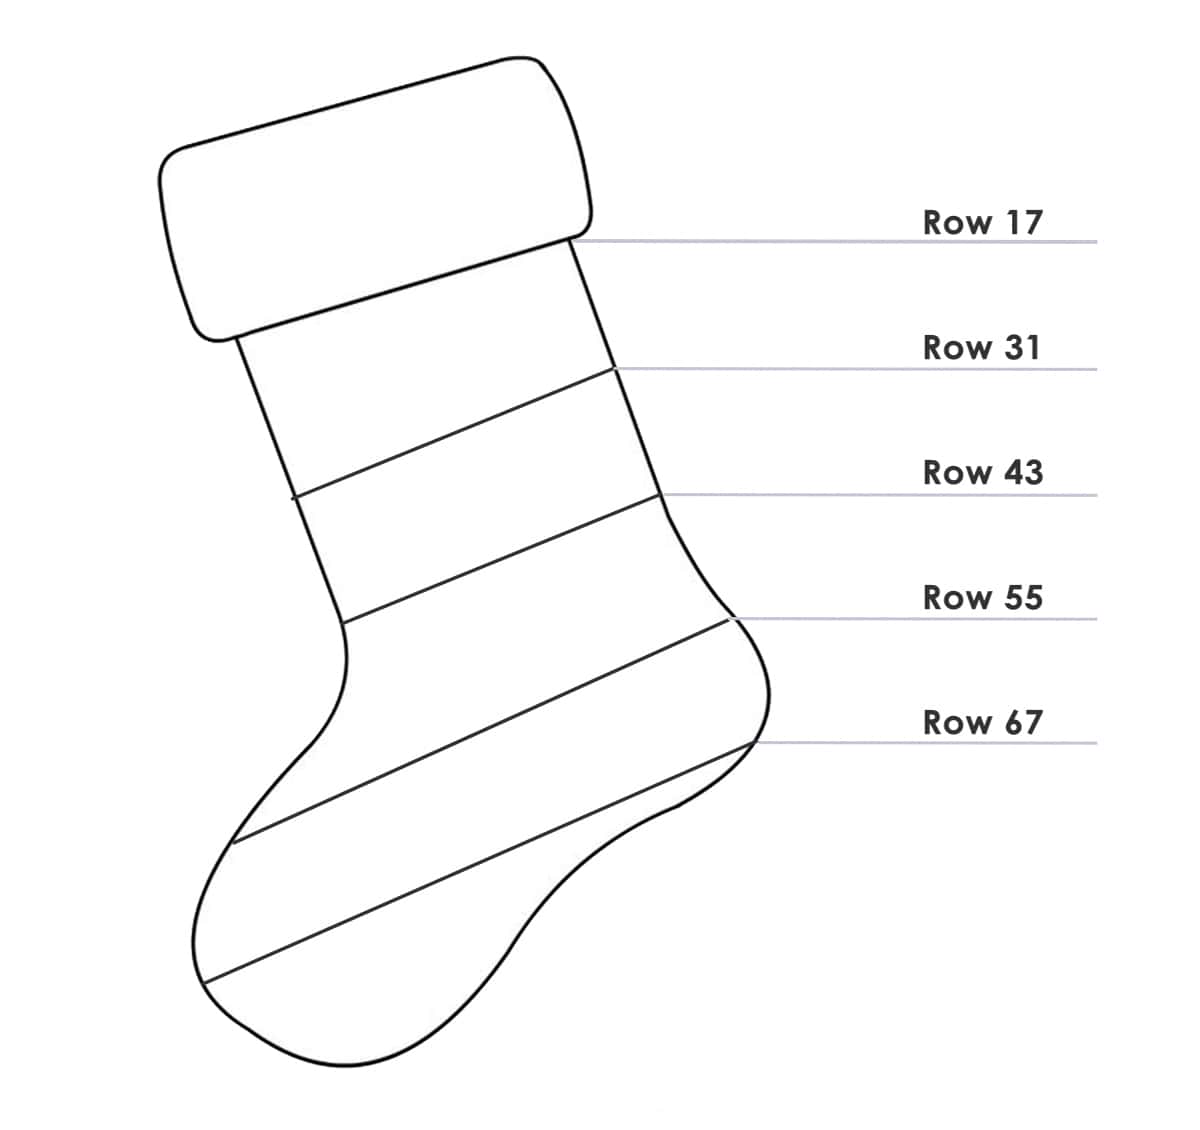 Christmas Stocking outline with color change rows demarked.